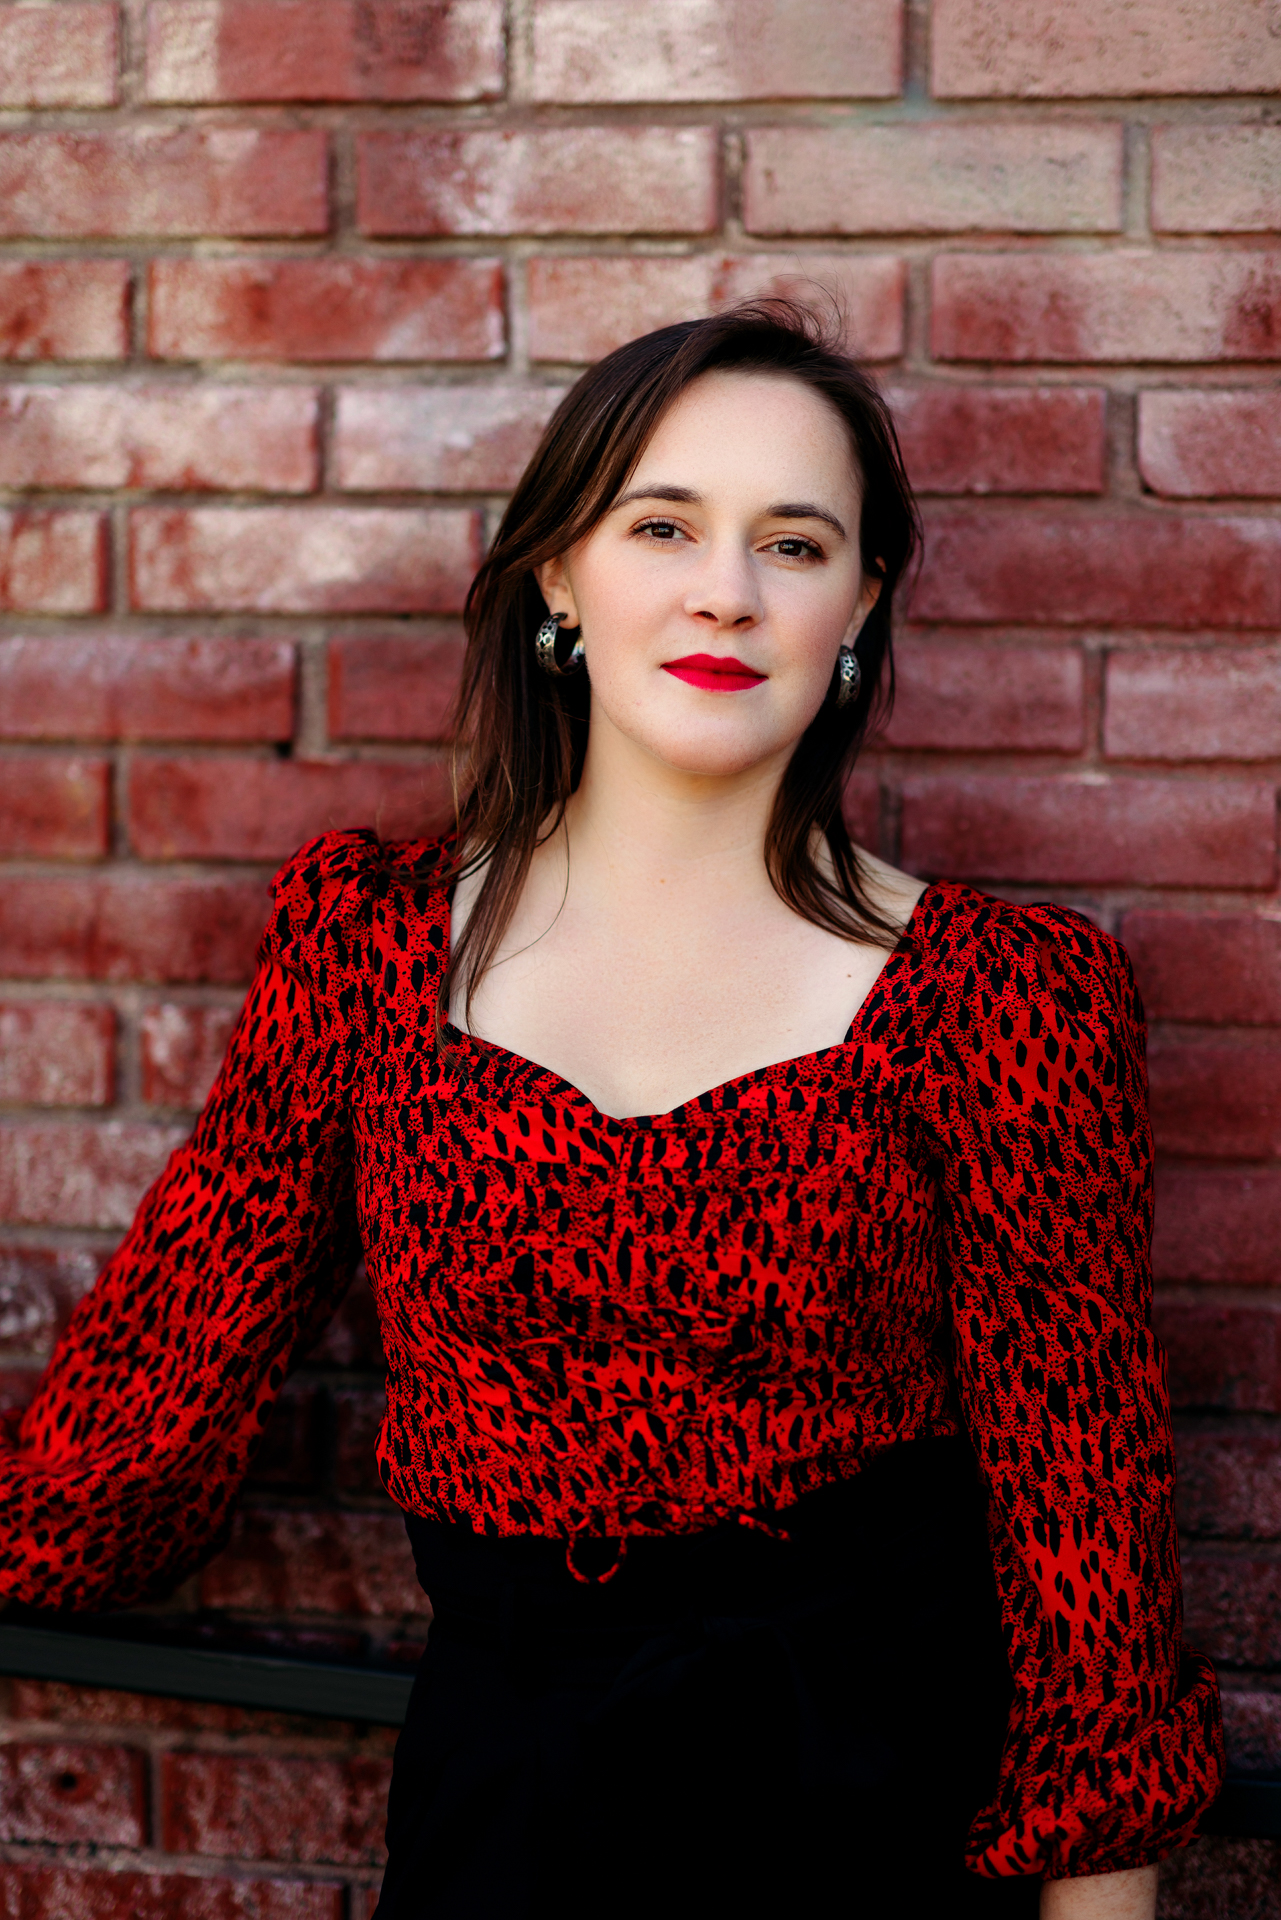 Professional actor headshot of young woman with red shirt against brick wall